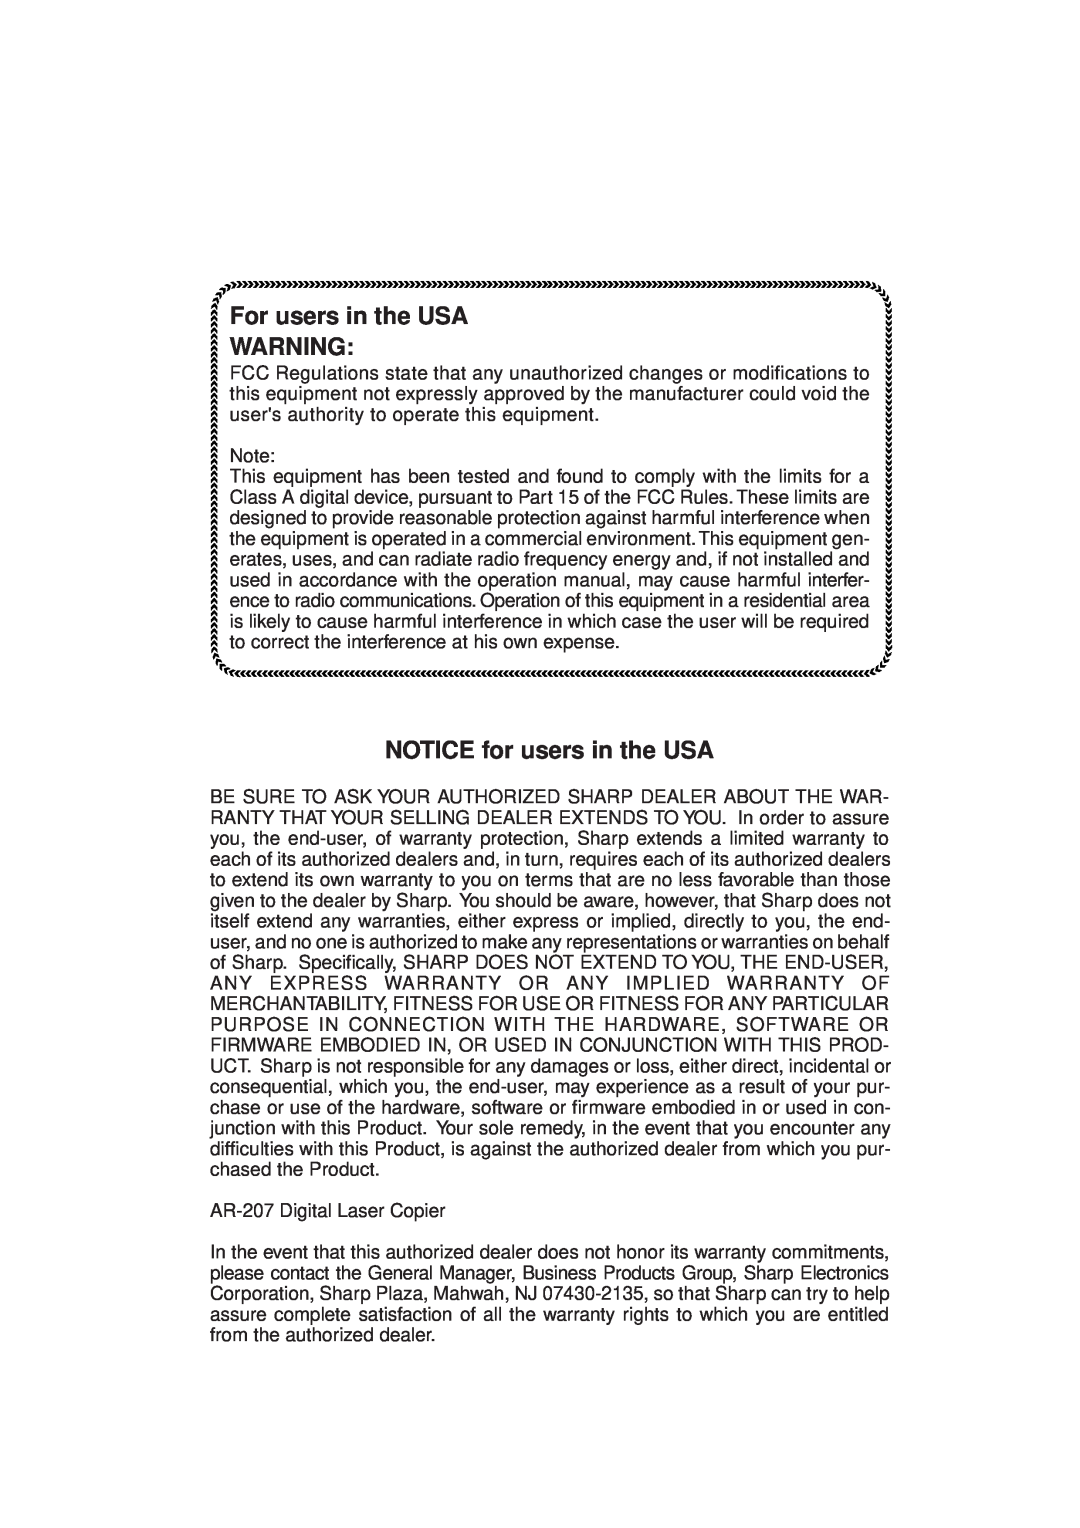 Sharp AR-207 operation manual For users in the USA, NOTICE for users in the USA 